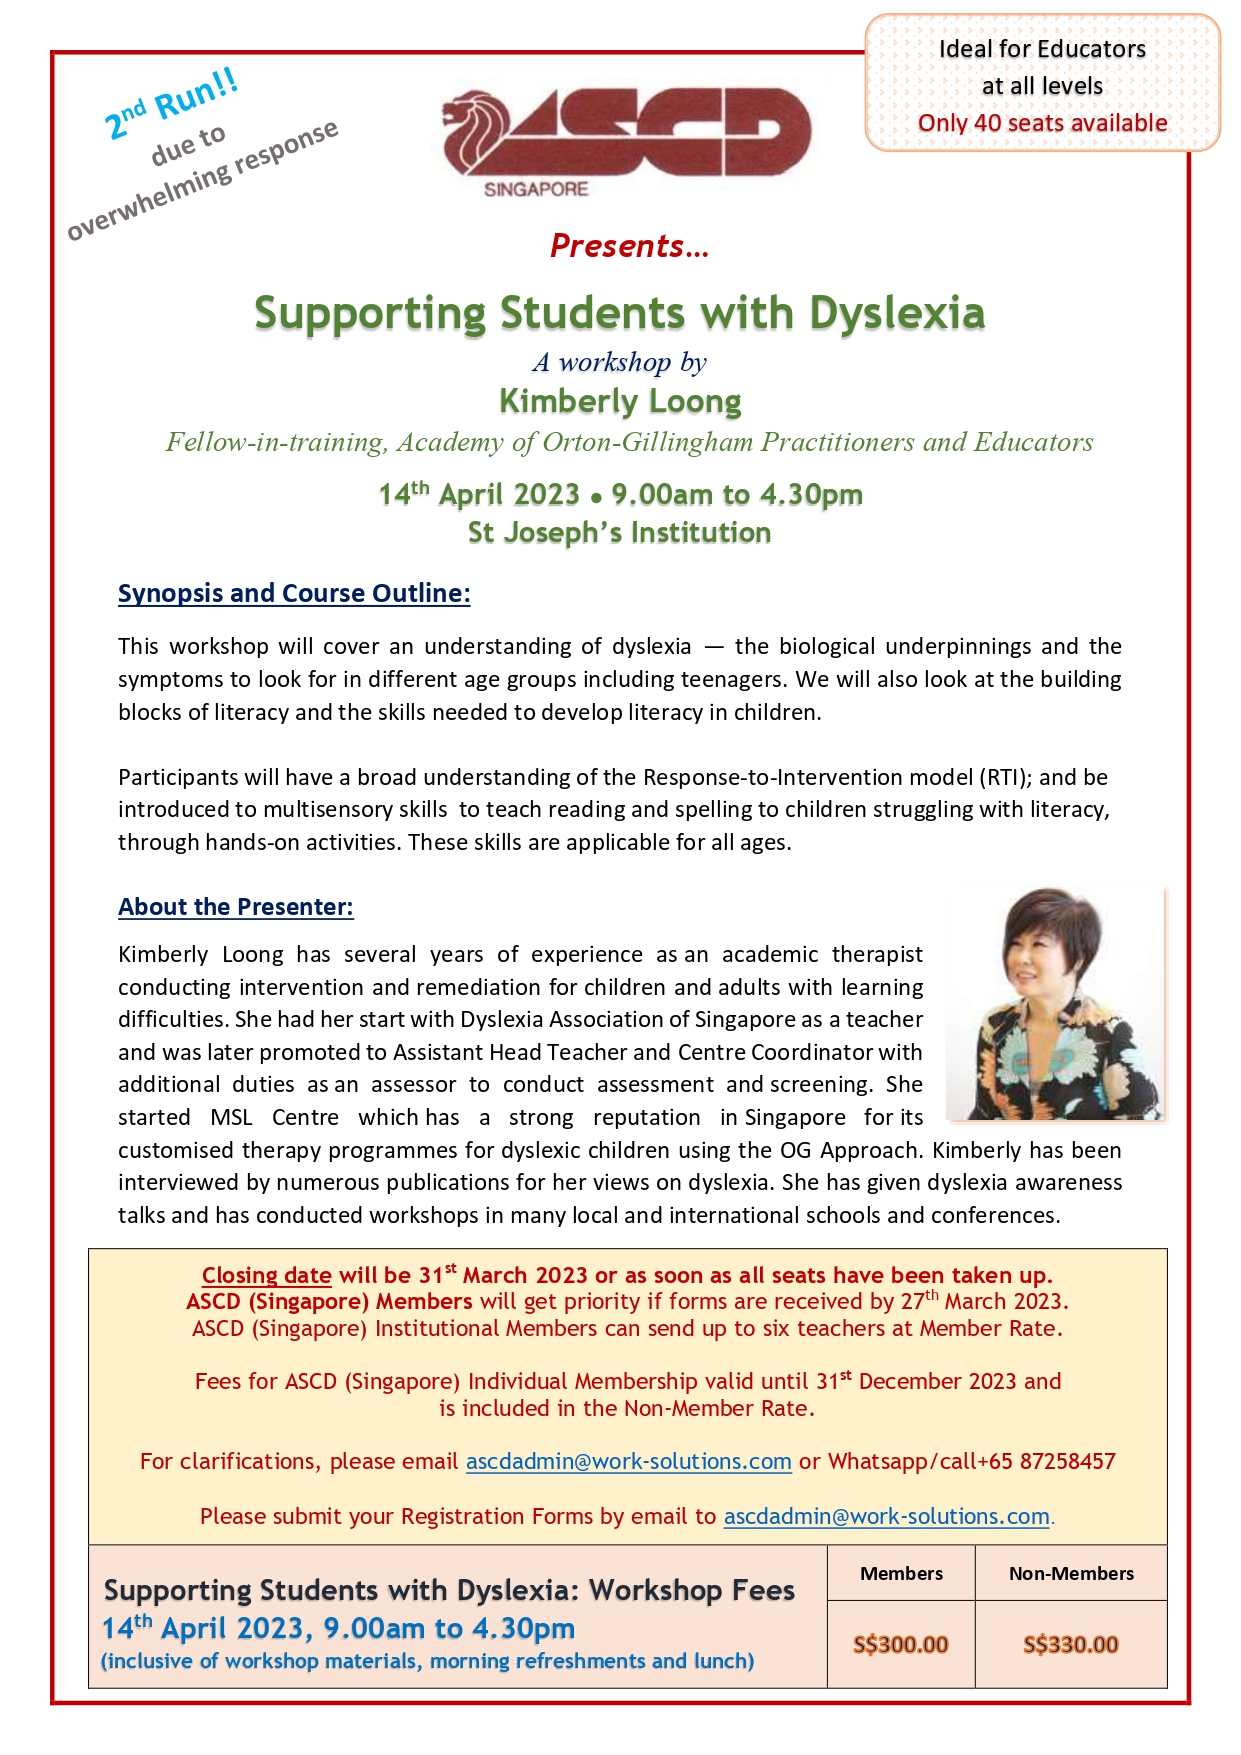 Supporting Students with Dyslexia flyer (14 Apr 23).jpeg